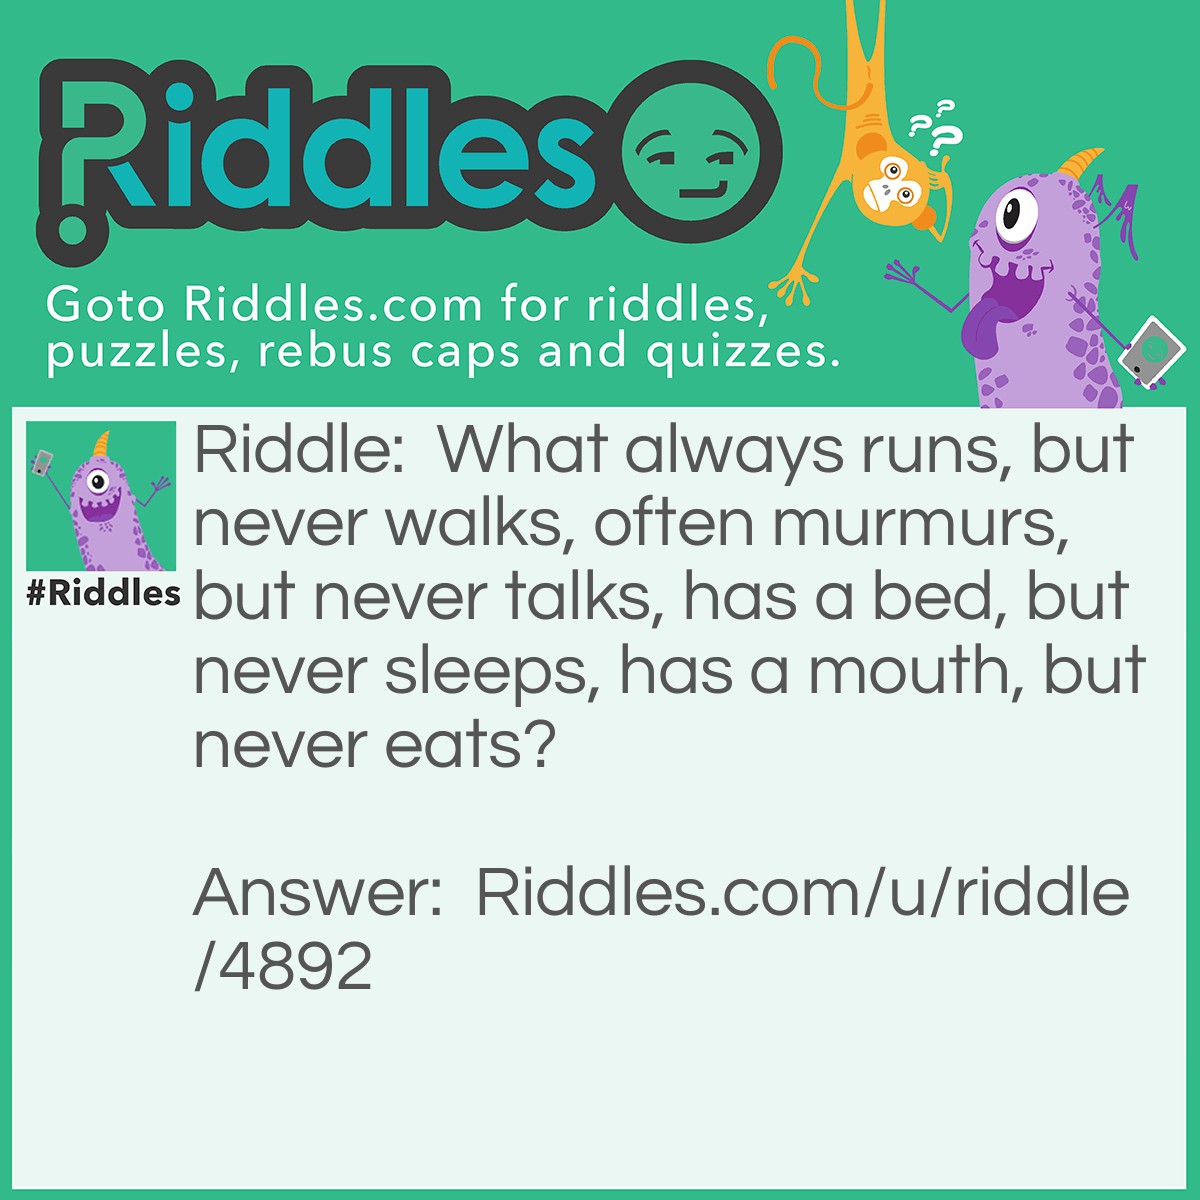 Riddle: What always runs, but never walks, often murmurs, but never talks, has a bed, but never sleeps, has a mouth, but never eats? Answer: A river.